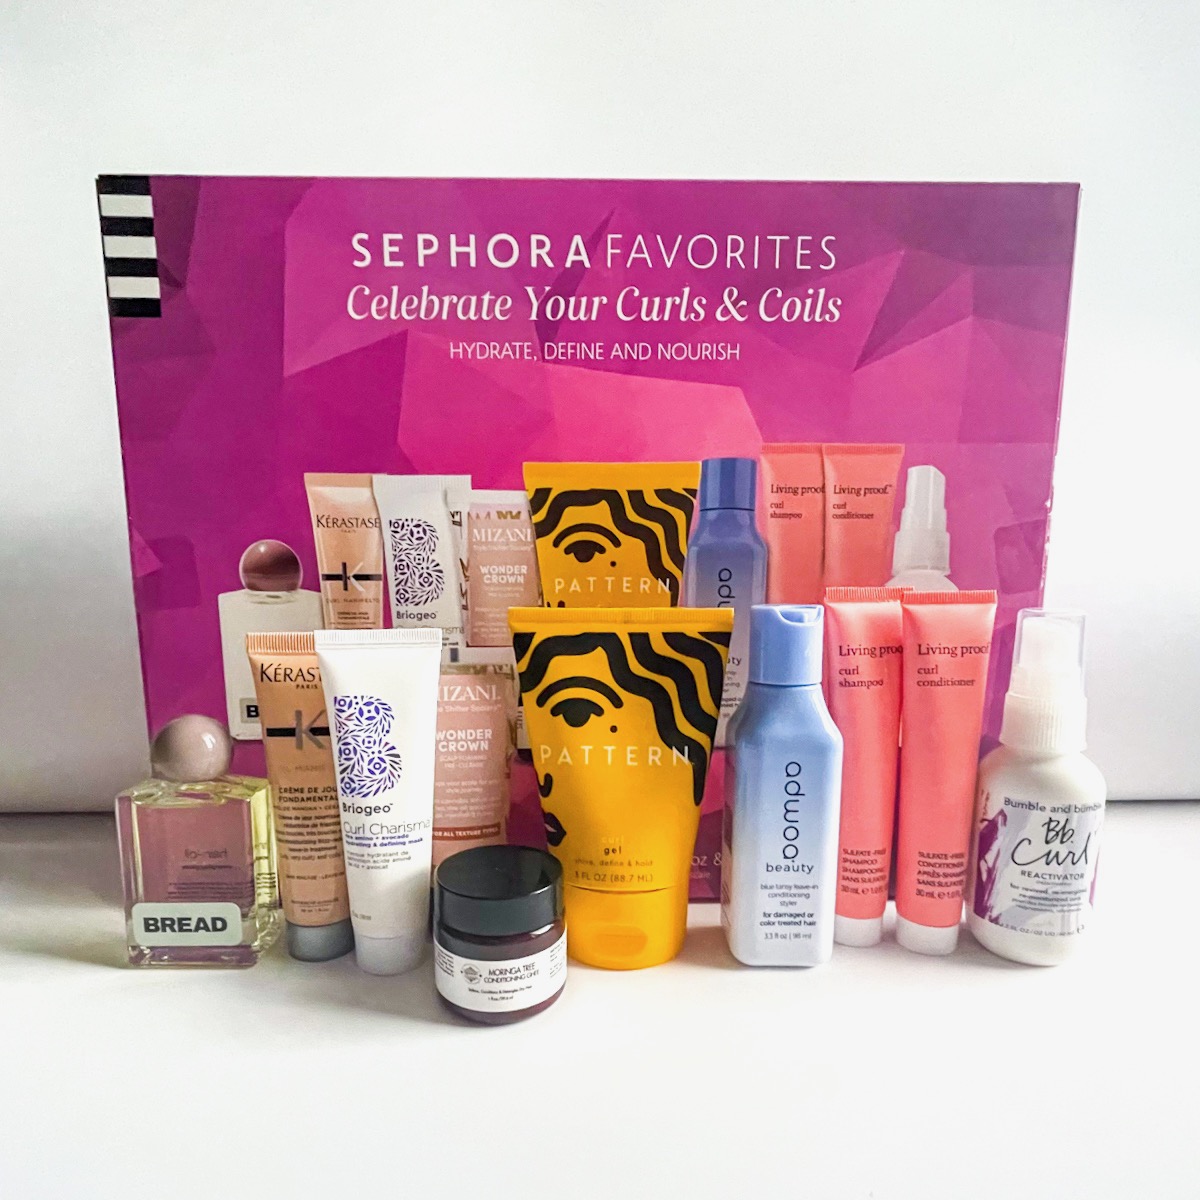 Sephora Favorites Curly Must Haves Kit Review MSA